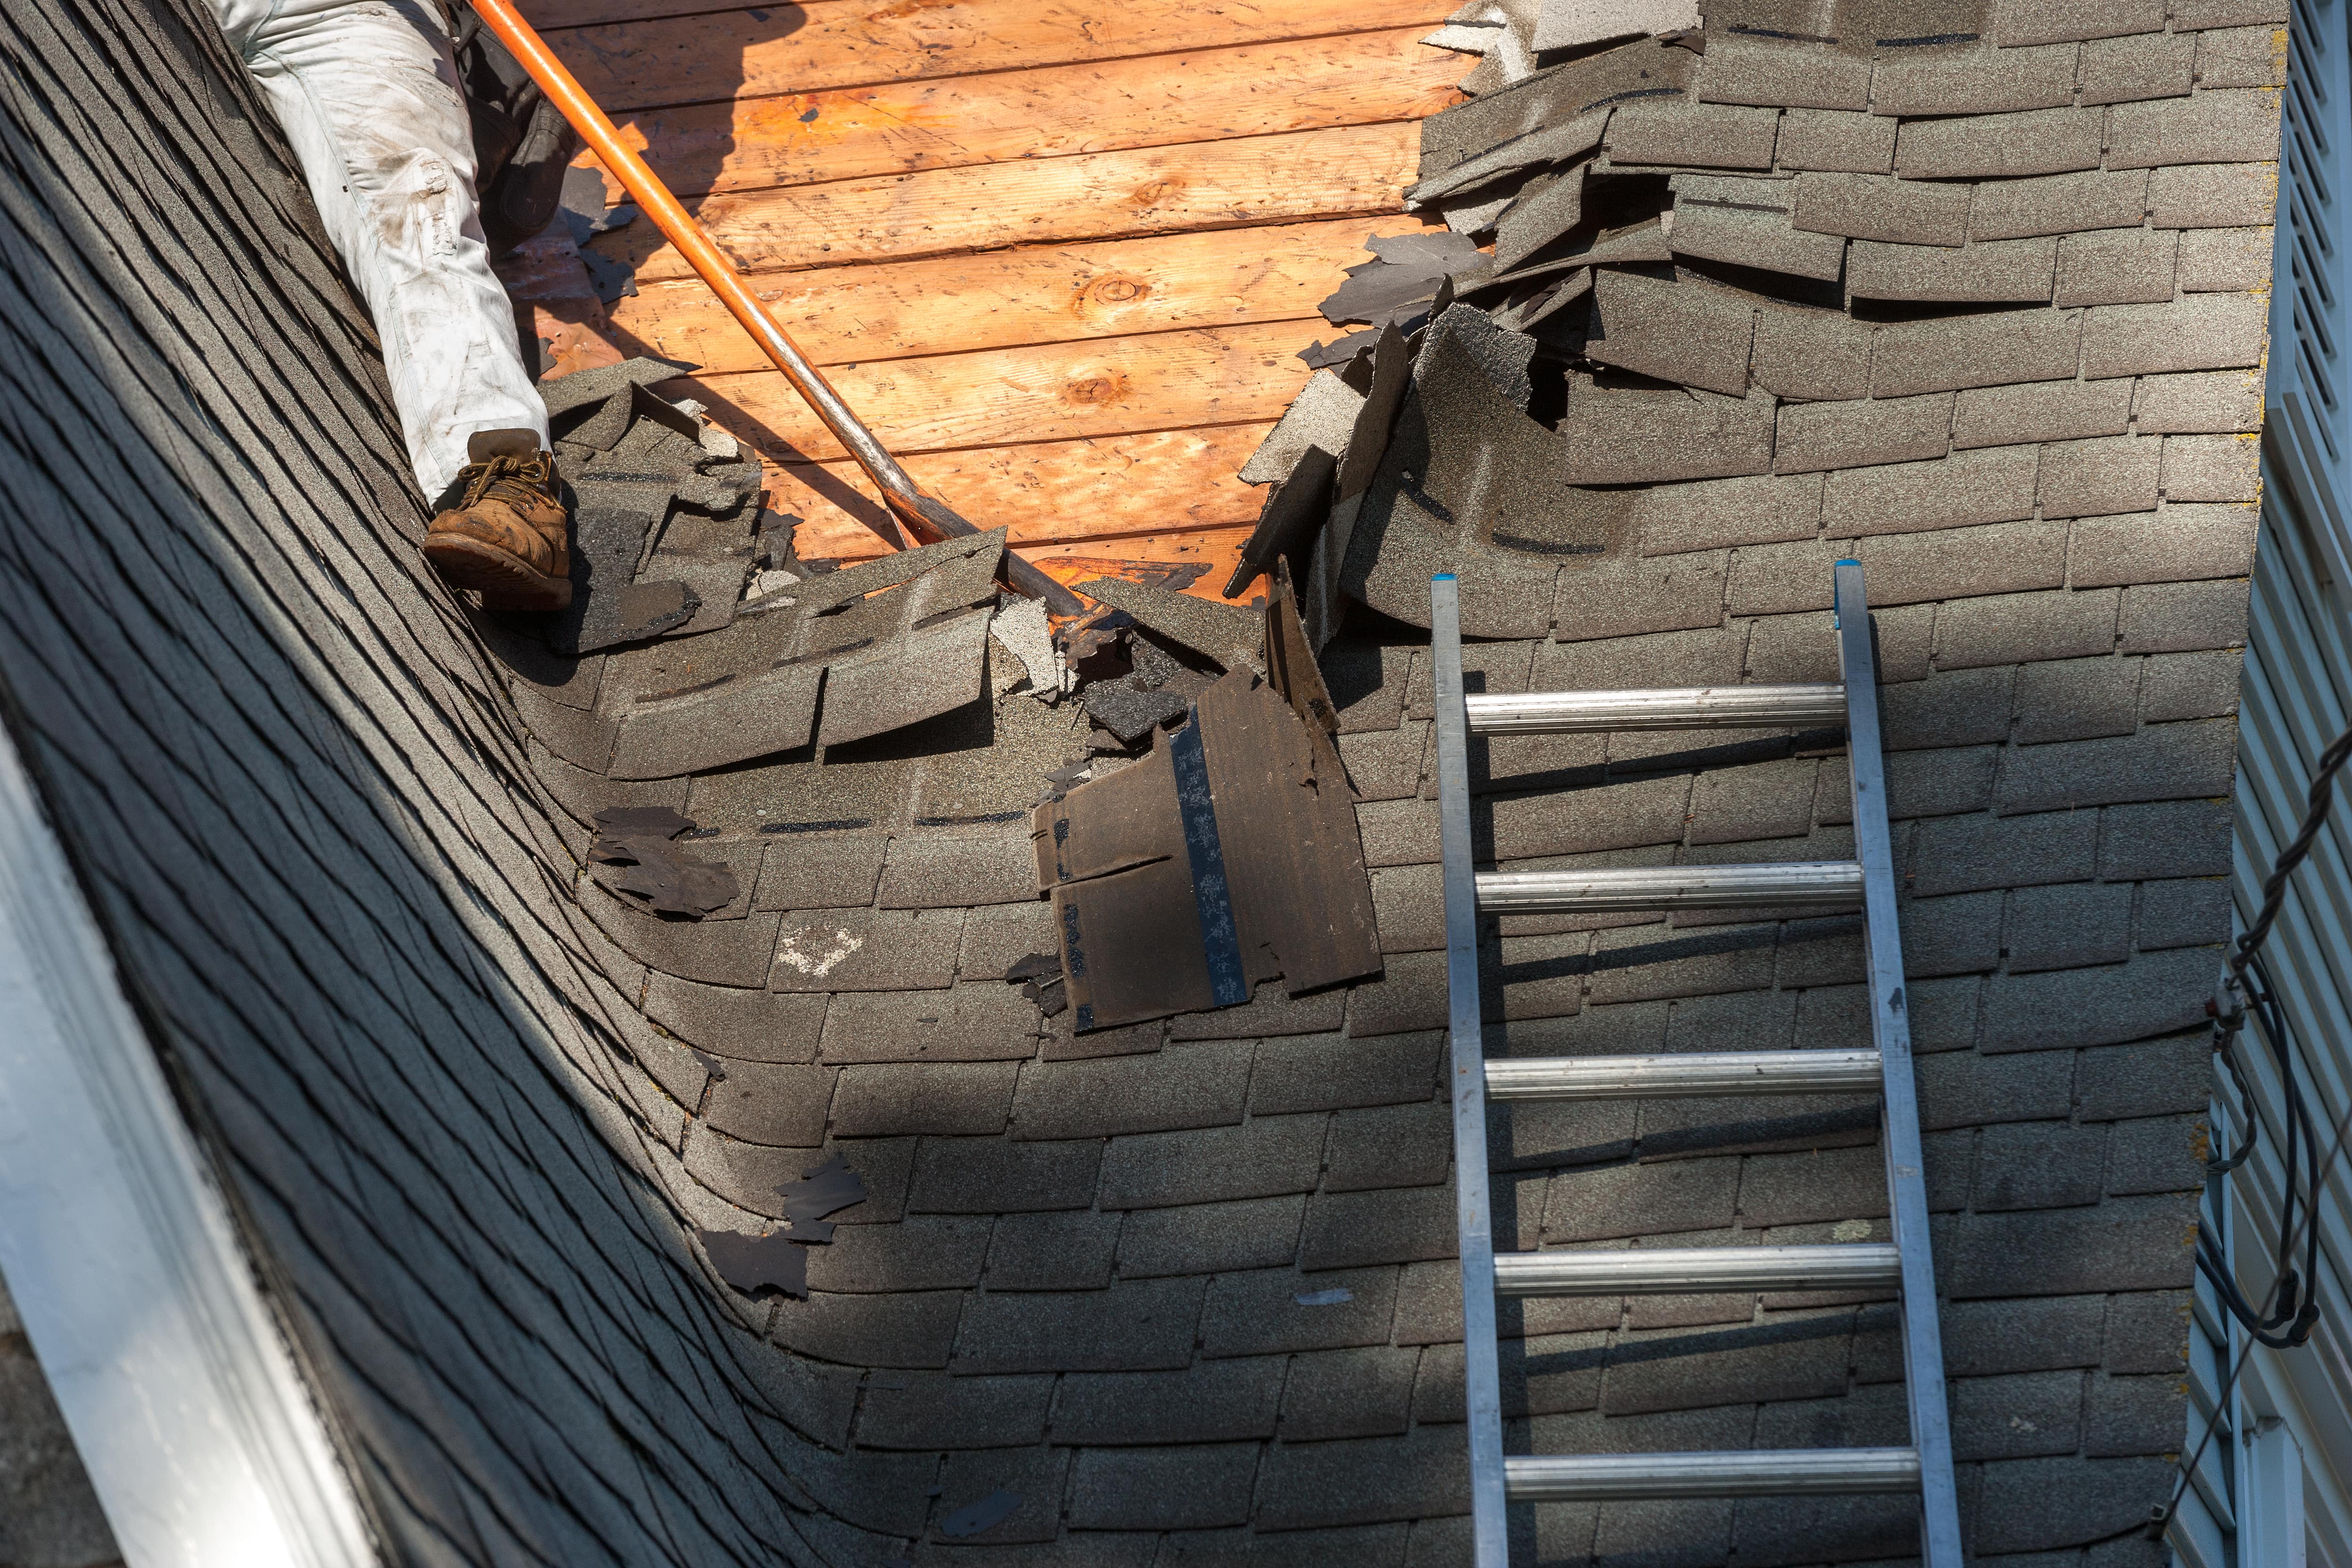 5 Common Causes of Roof Damage Seen by Roofing Contractors